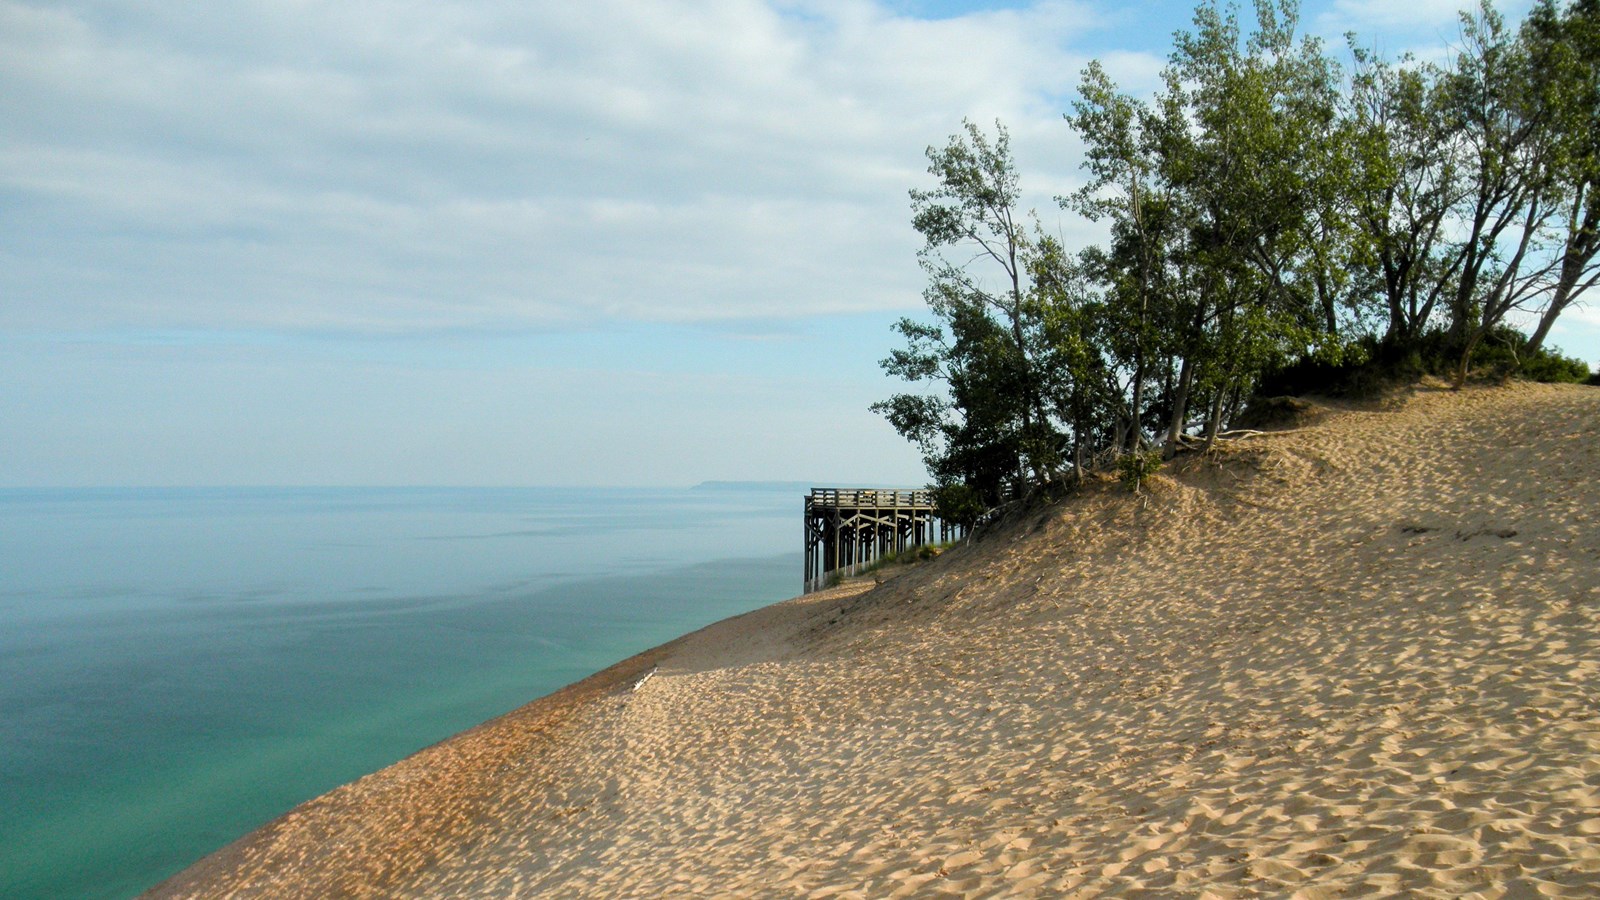 Wooden overlook platform nestled in trees at edge of dune bluff with turquoise water behind